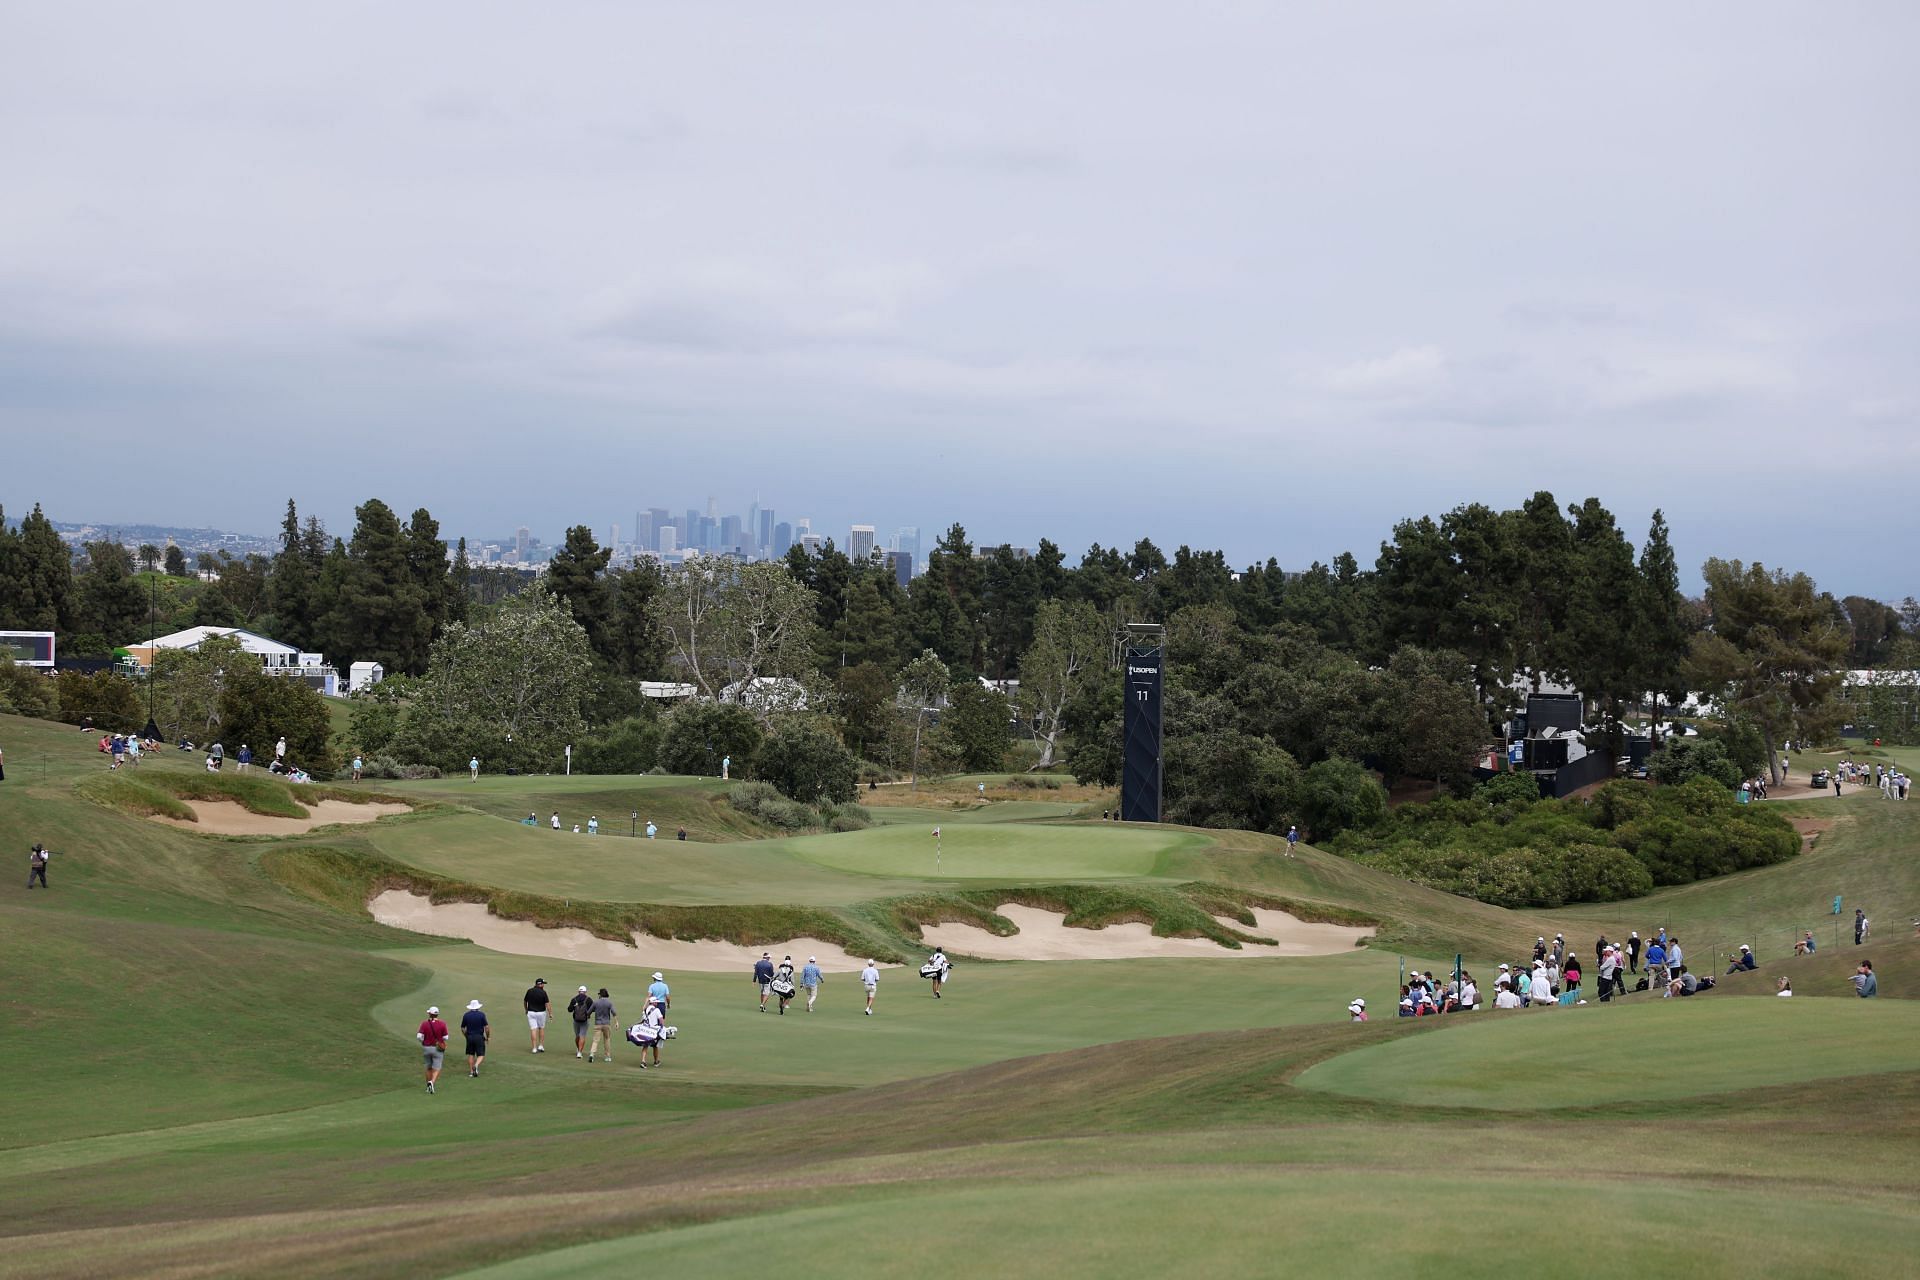 First practice rounds of the 2023 U.S. Open at Los Angeles Country Club (Image via Getty).